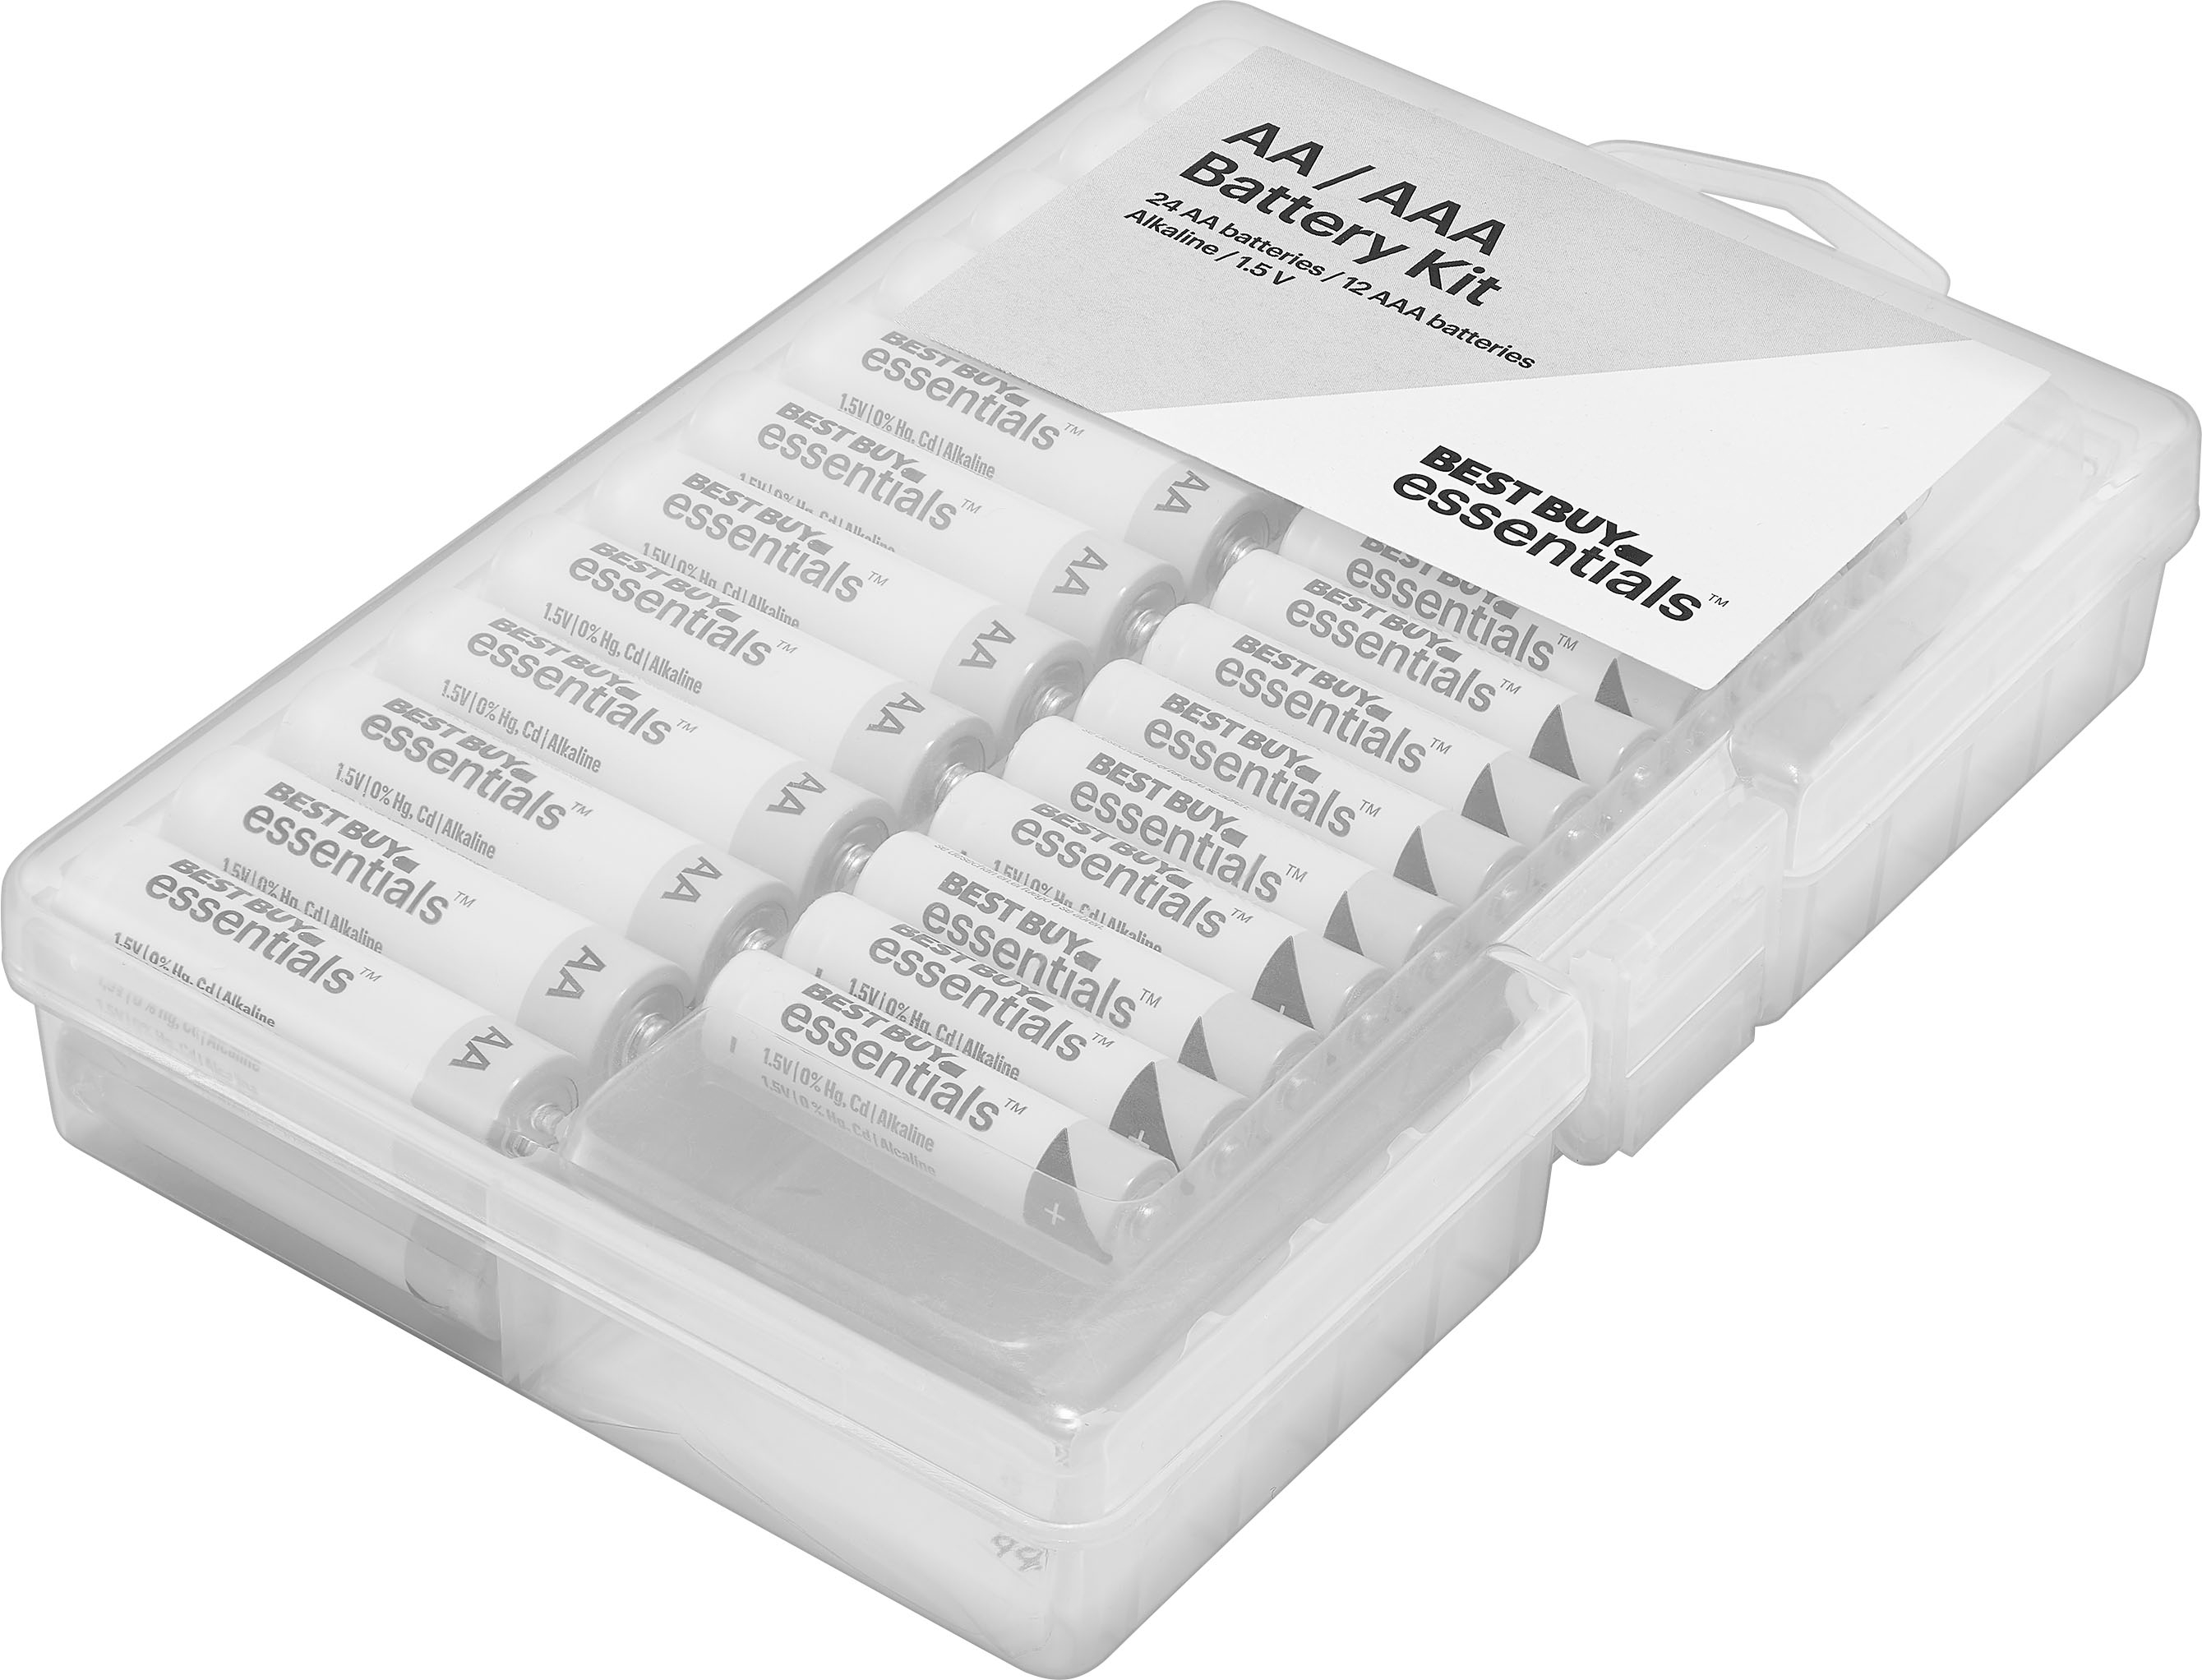 Optima - The Low Vision Experts - Pack of 3 AAA batteries